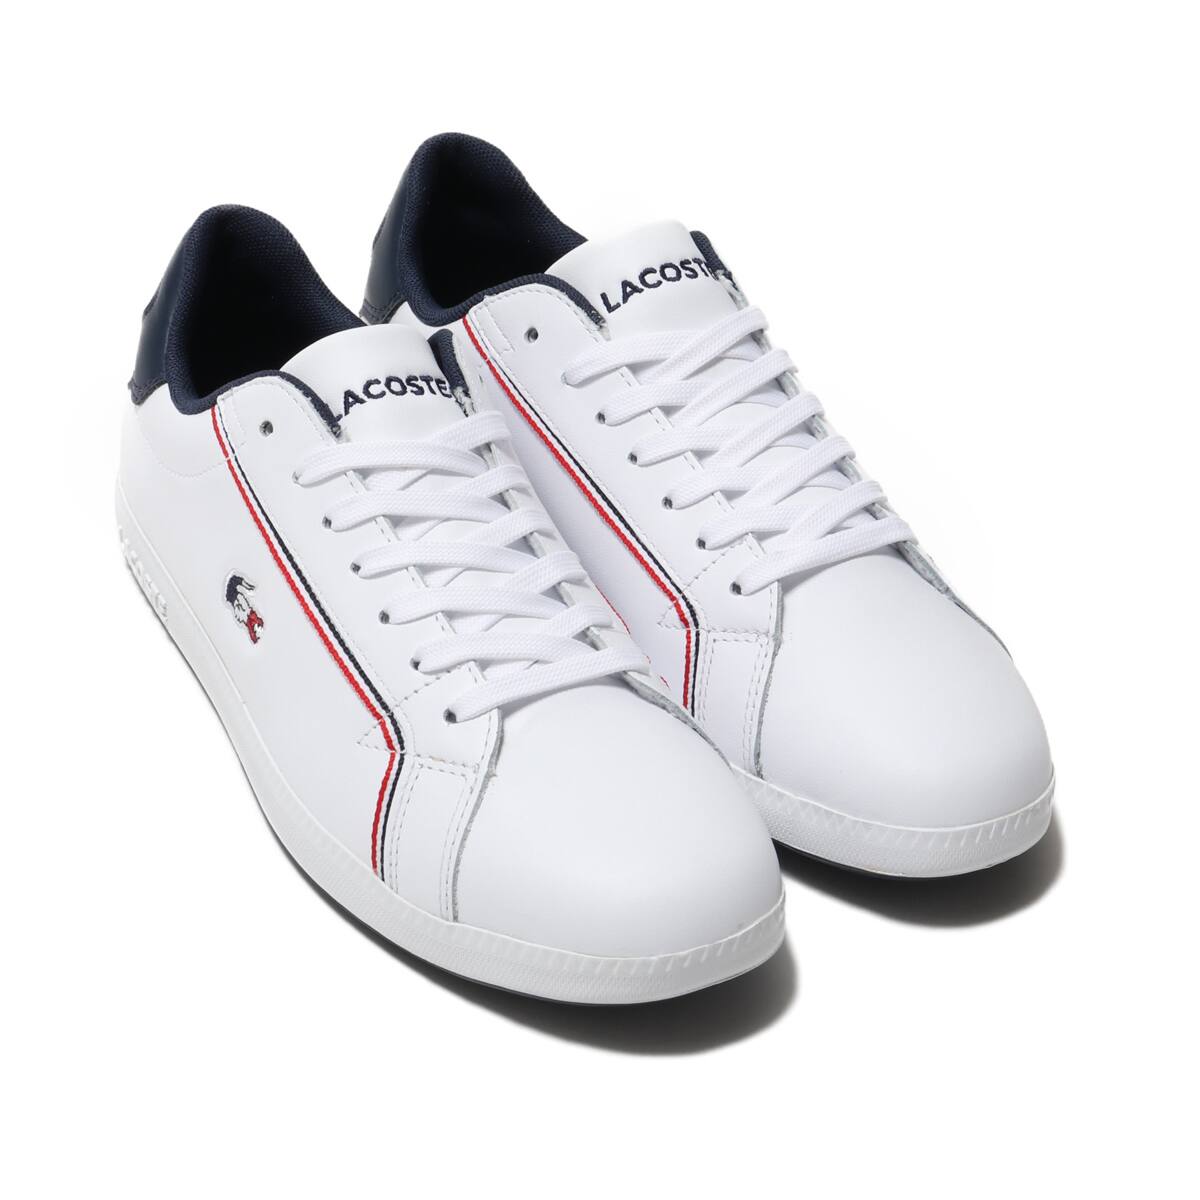 LACOSTE GRADUATE 119 2 WHT/NVY/RED 